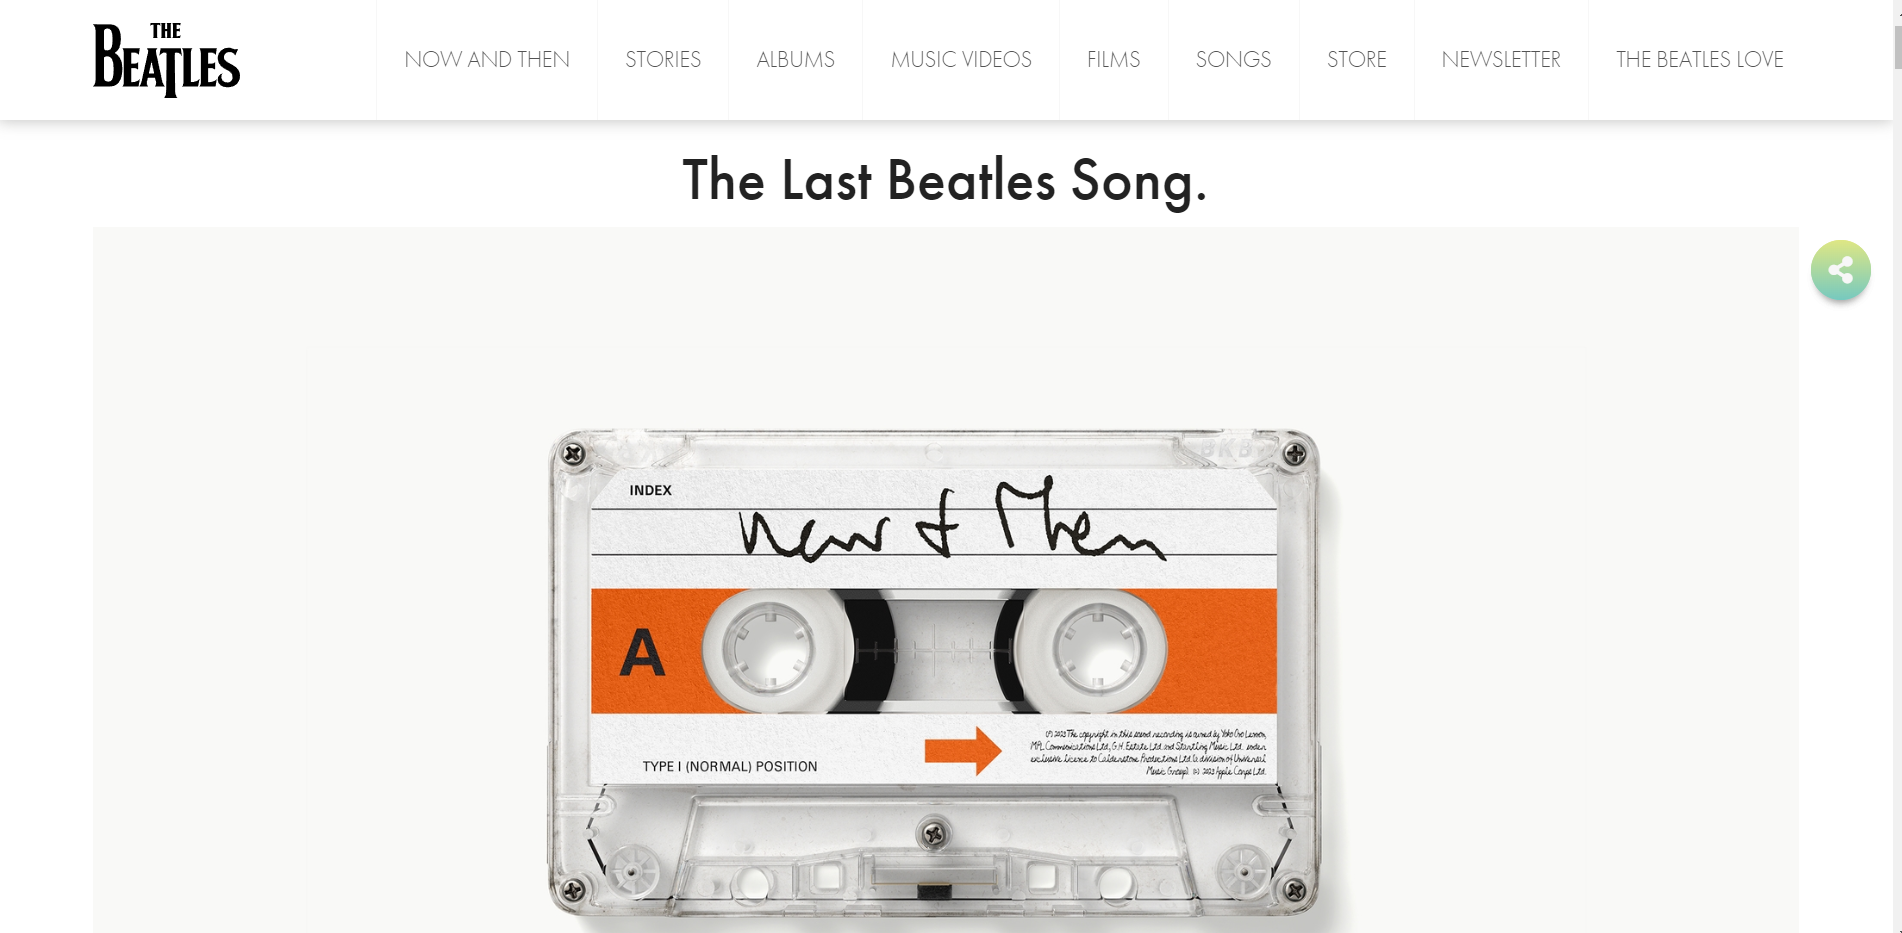 The Last Beatles Song